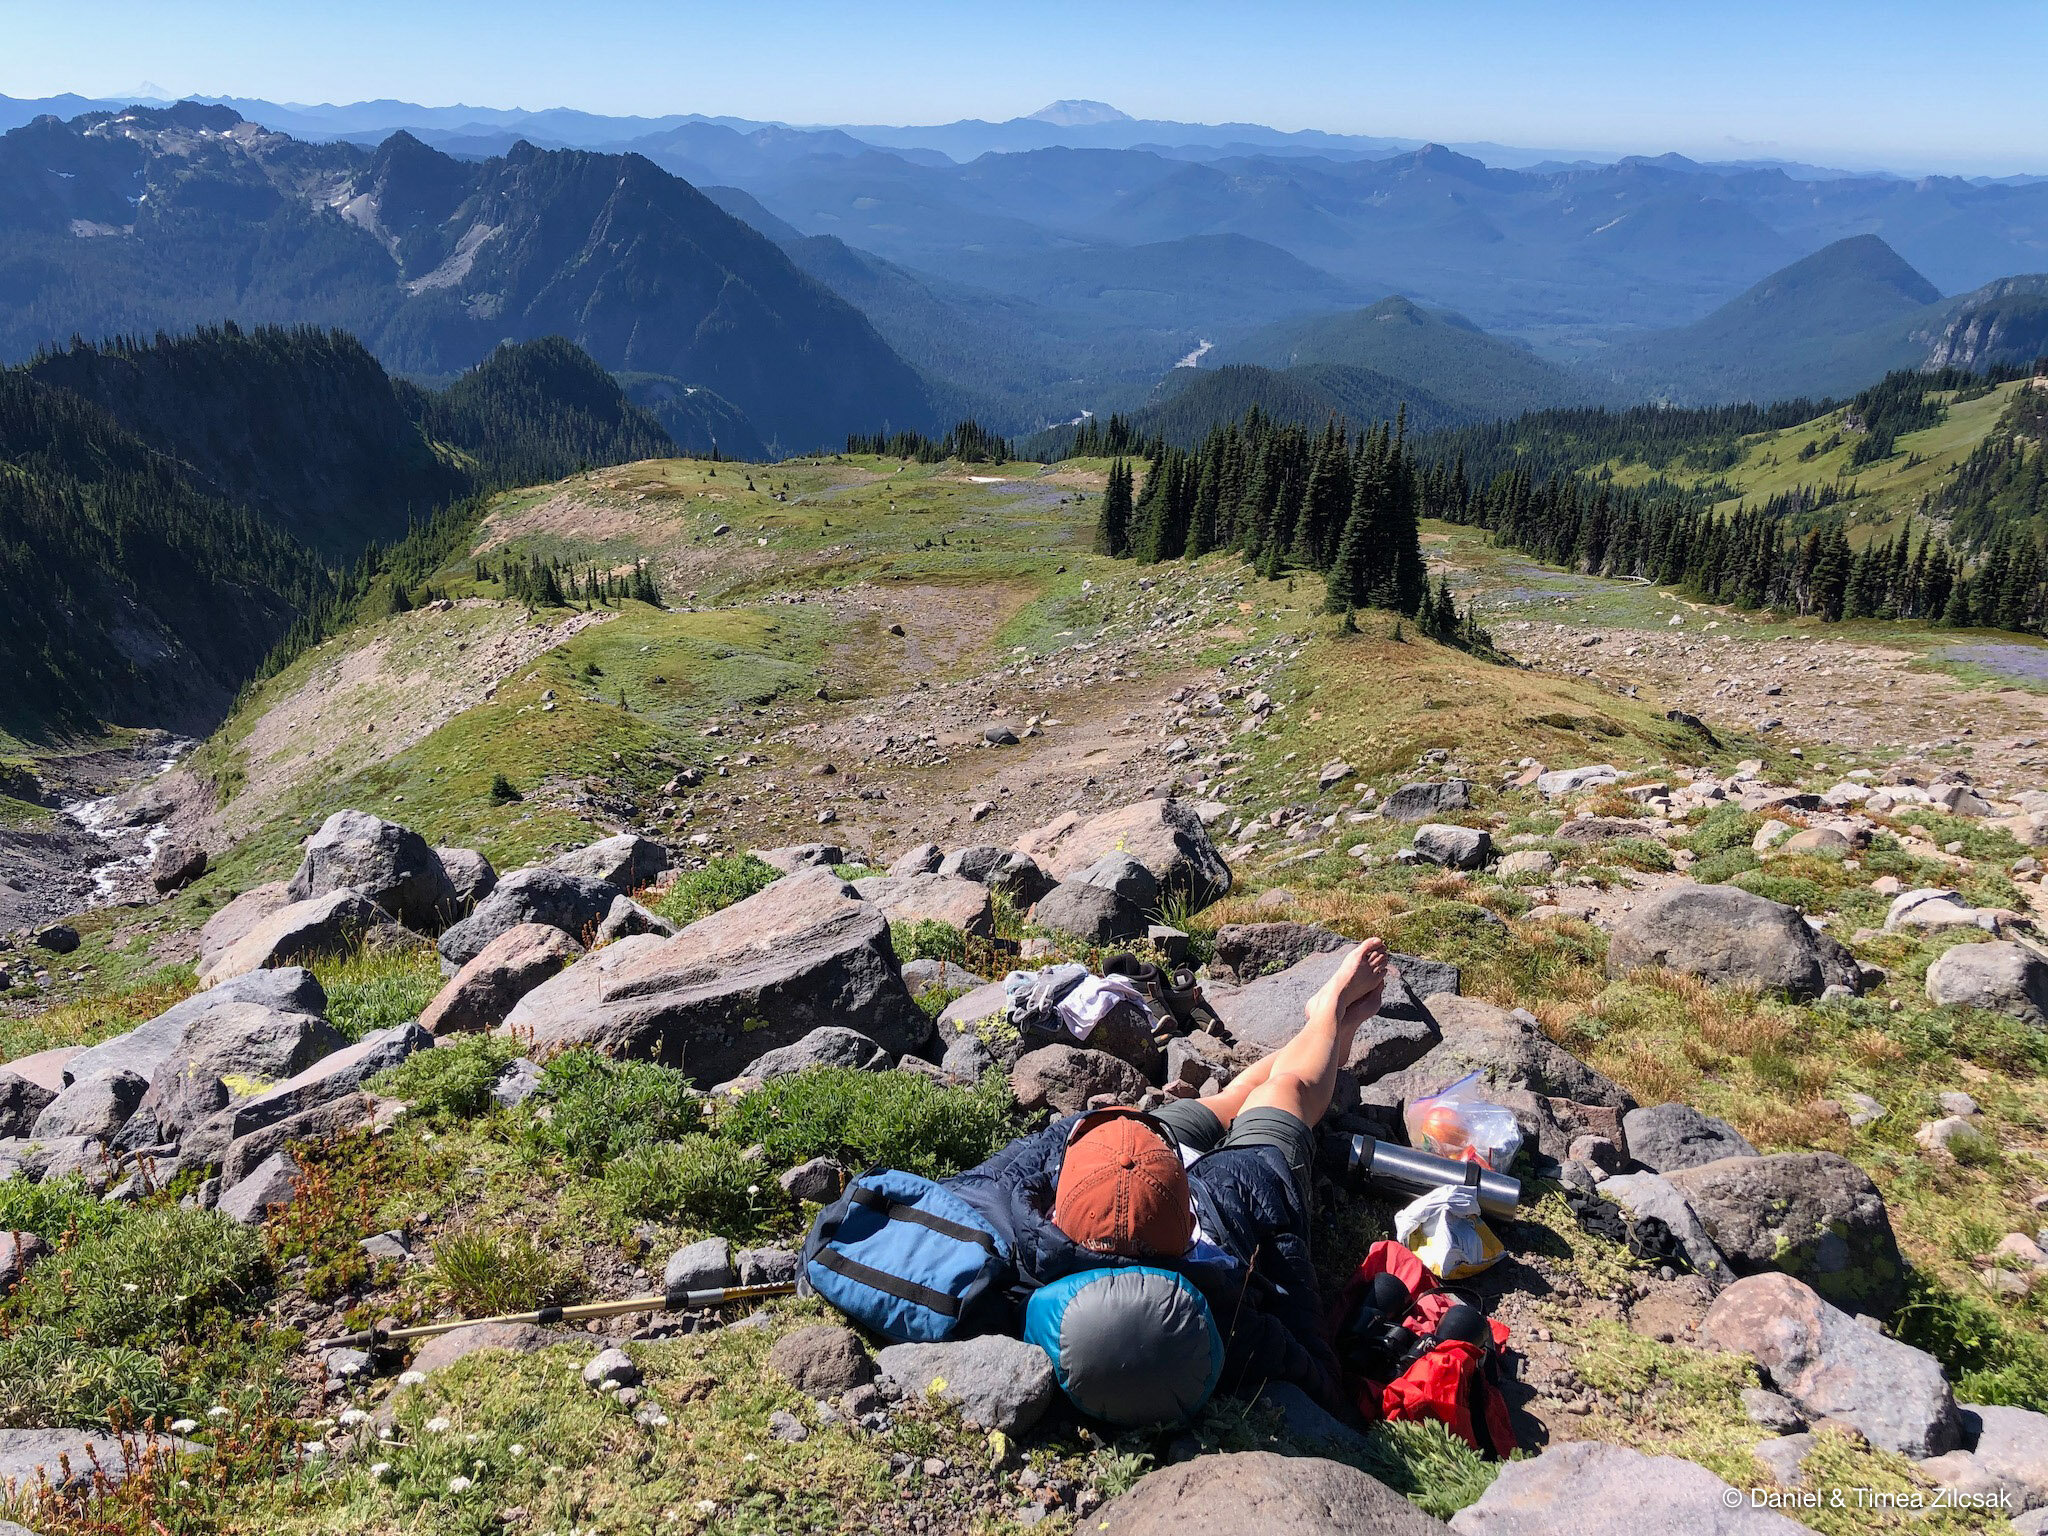 Lunch spot at Van Trump Park with views of the Tatoosh Range and St. Helens